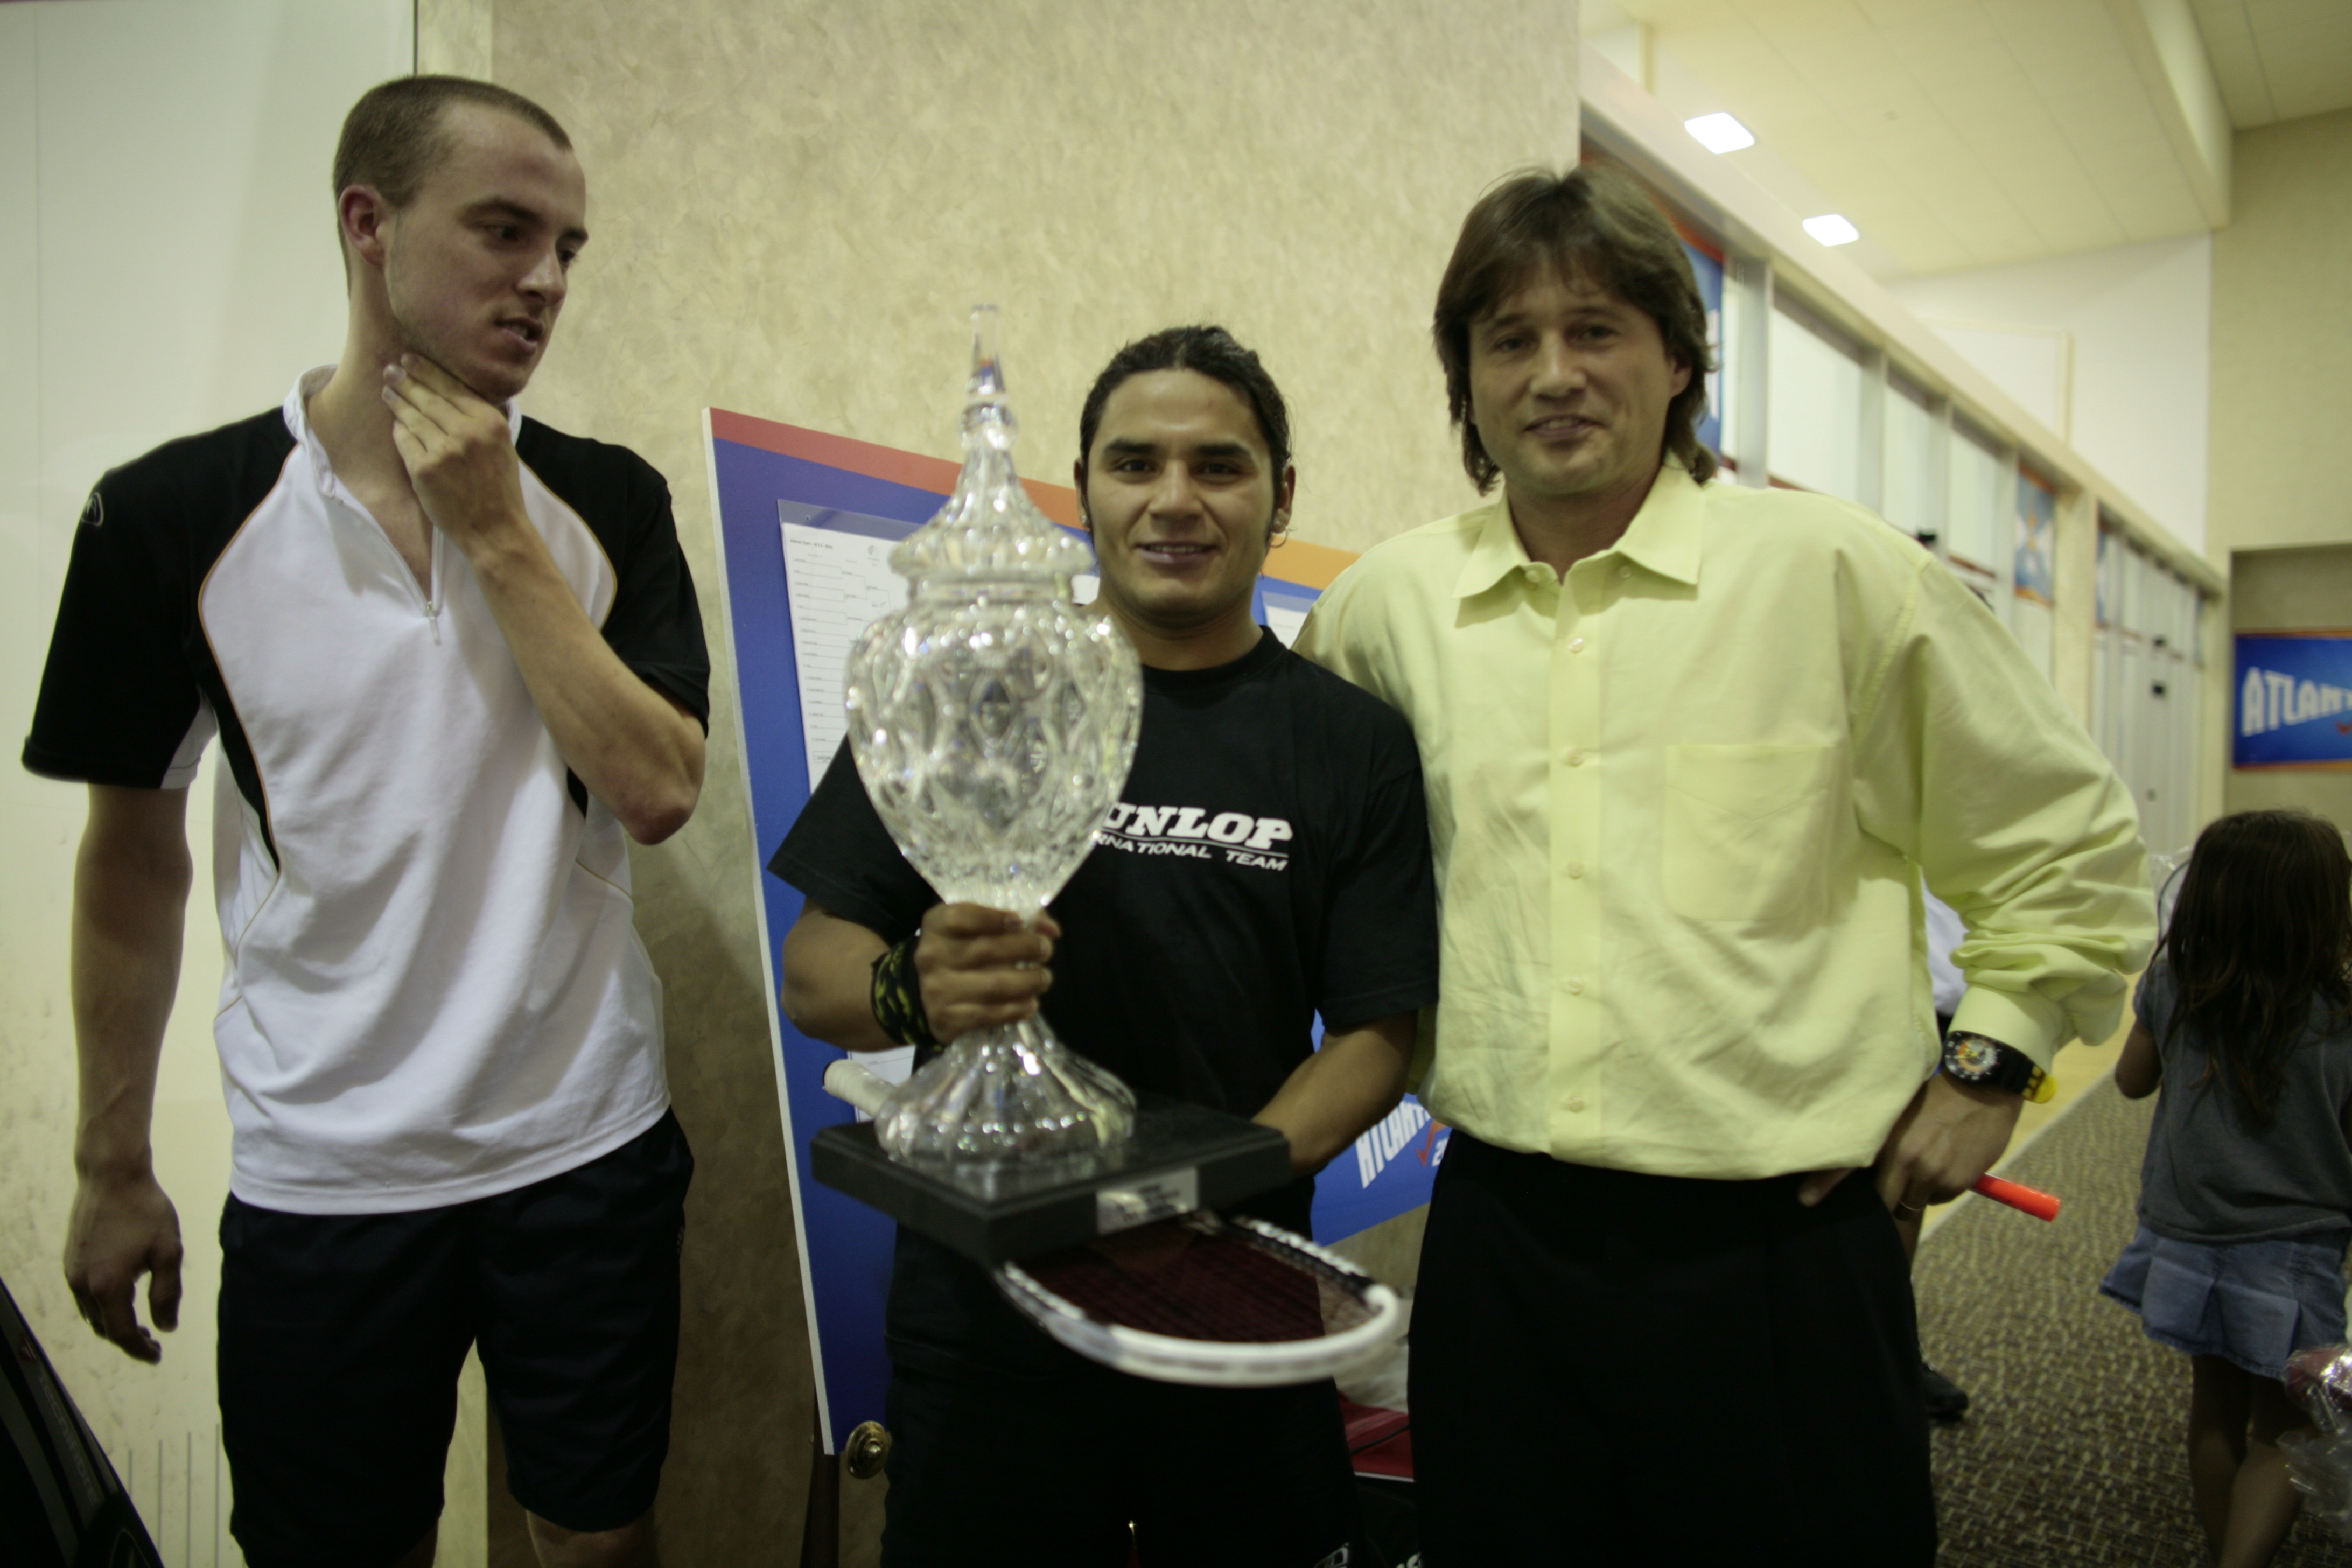 Eric Galvez (middle) secured his first Atlanta Open title by running away from Dylan Bennett in the fifth game of their final, 11-2. It was also Galvez’s first tour title since winning the Losone Swiss Classic in April 2007.